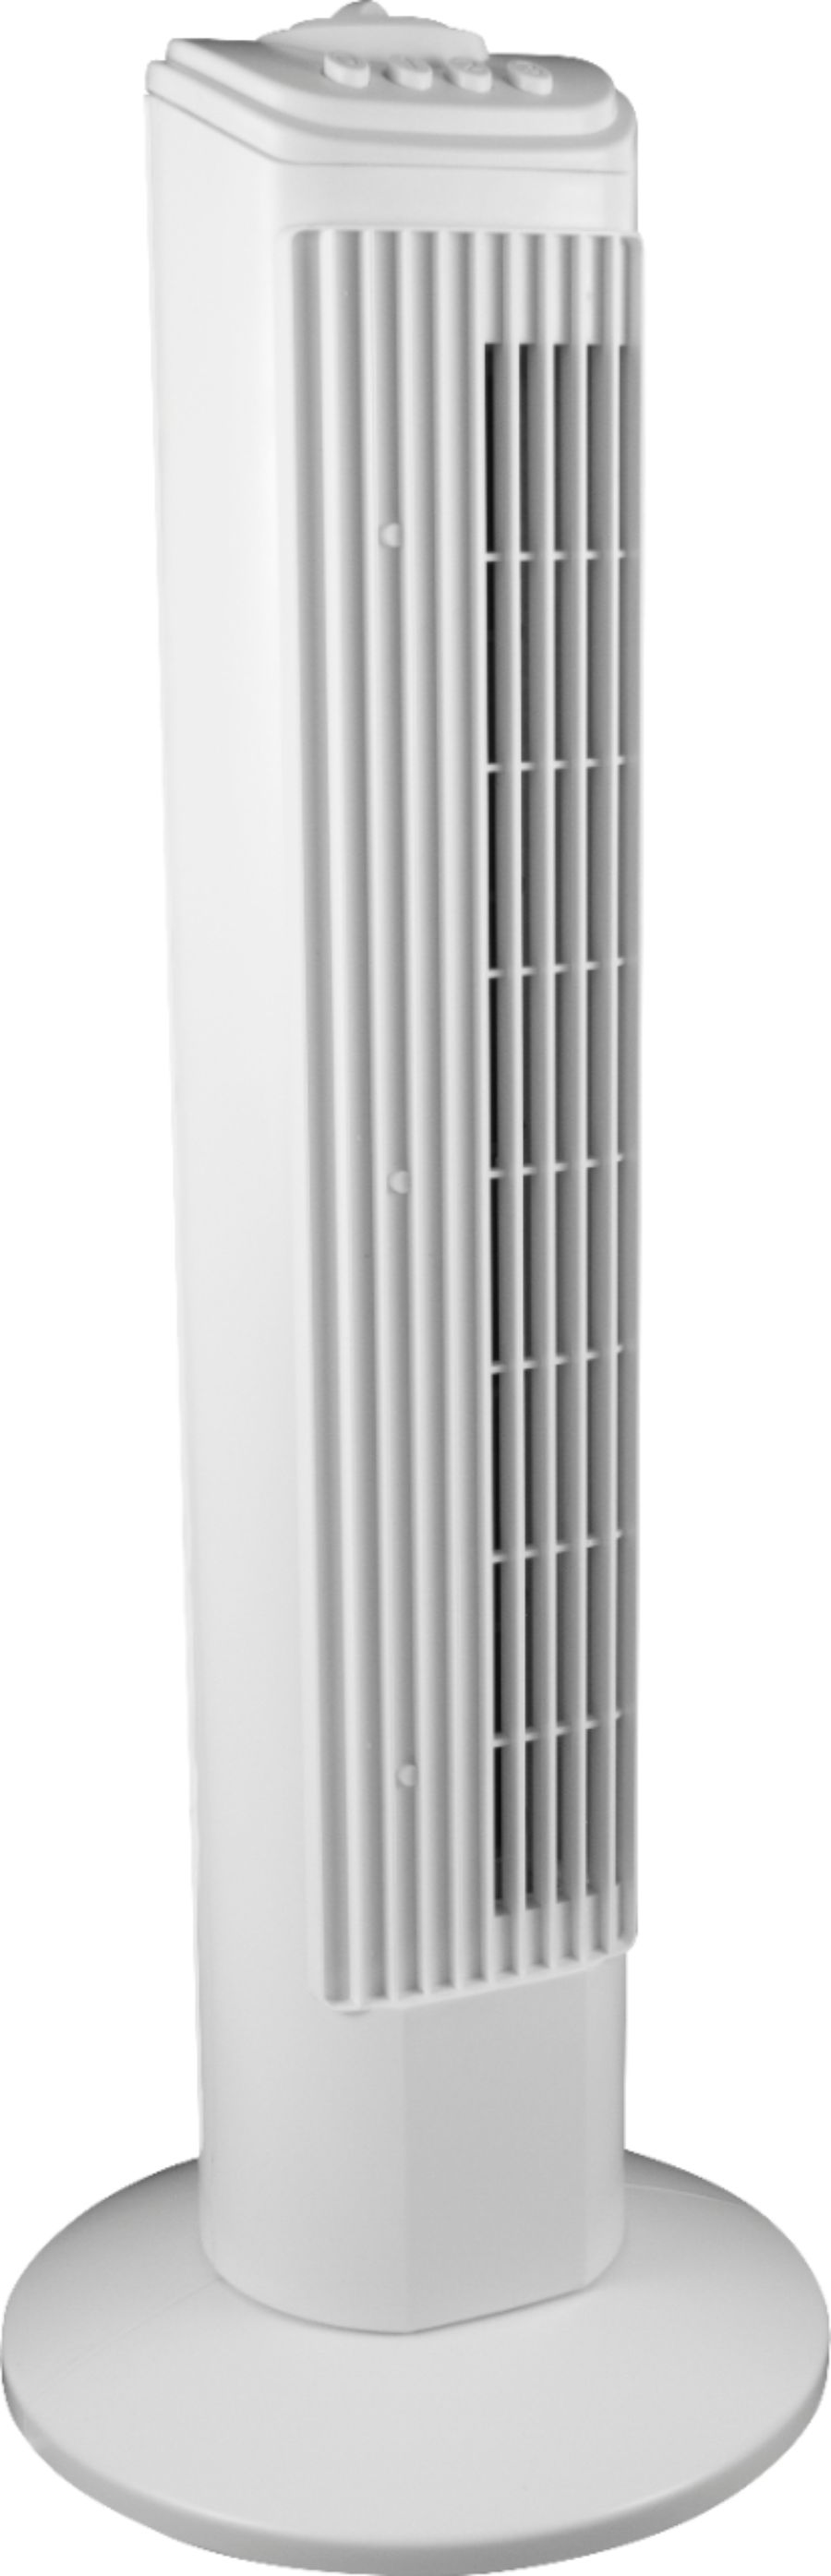 Angle View: Royal Sovereign - 30" Oscillating Slim Tower Fan - White